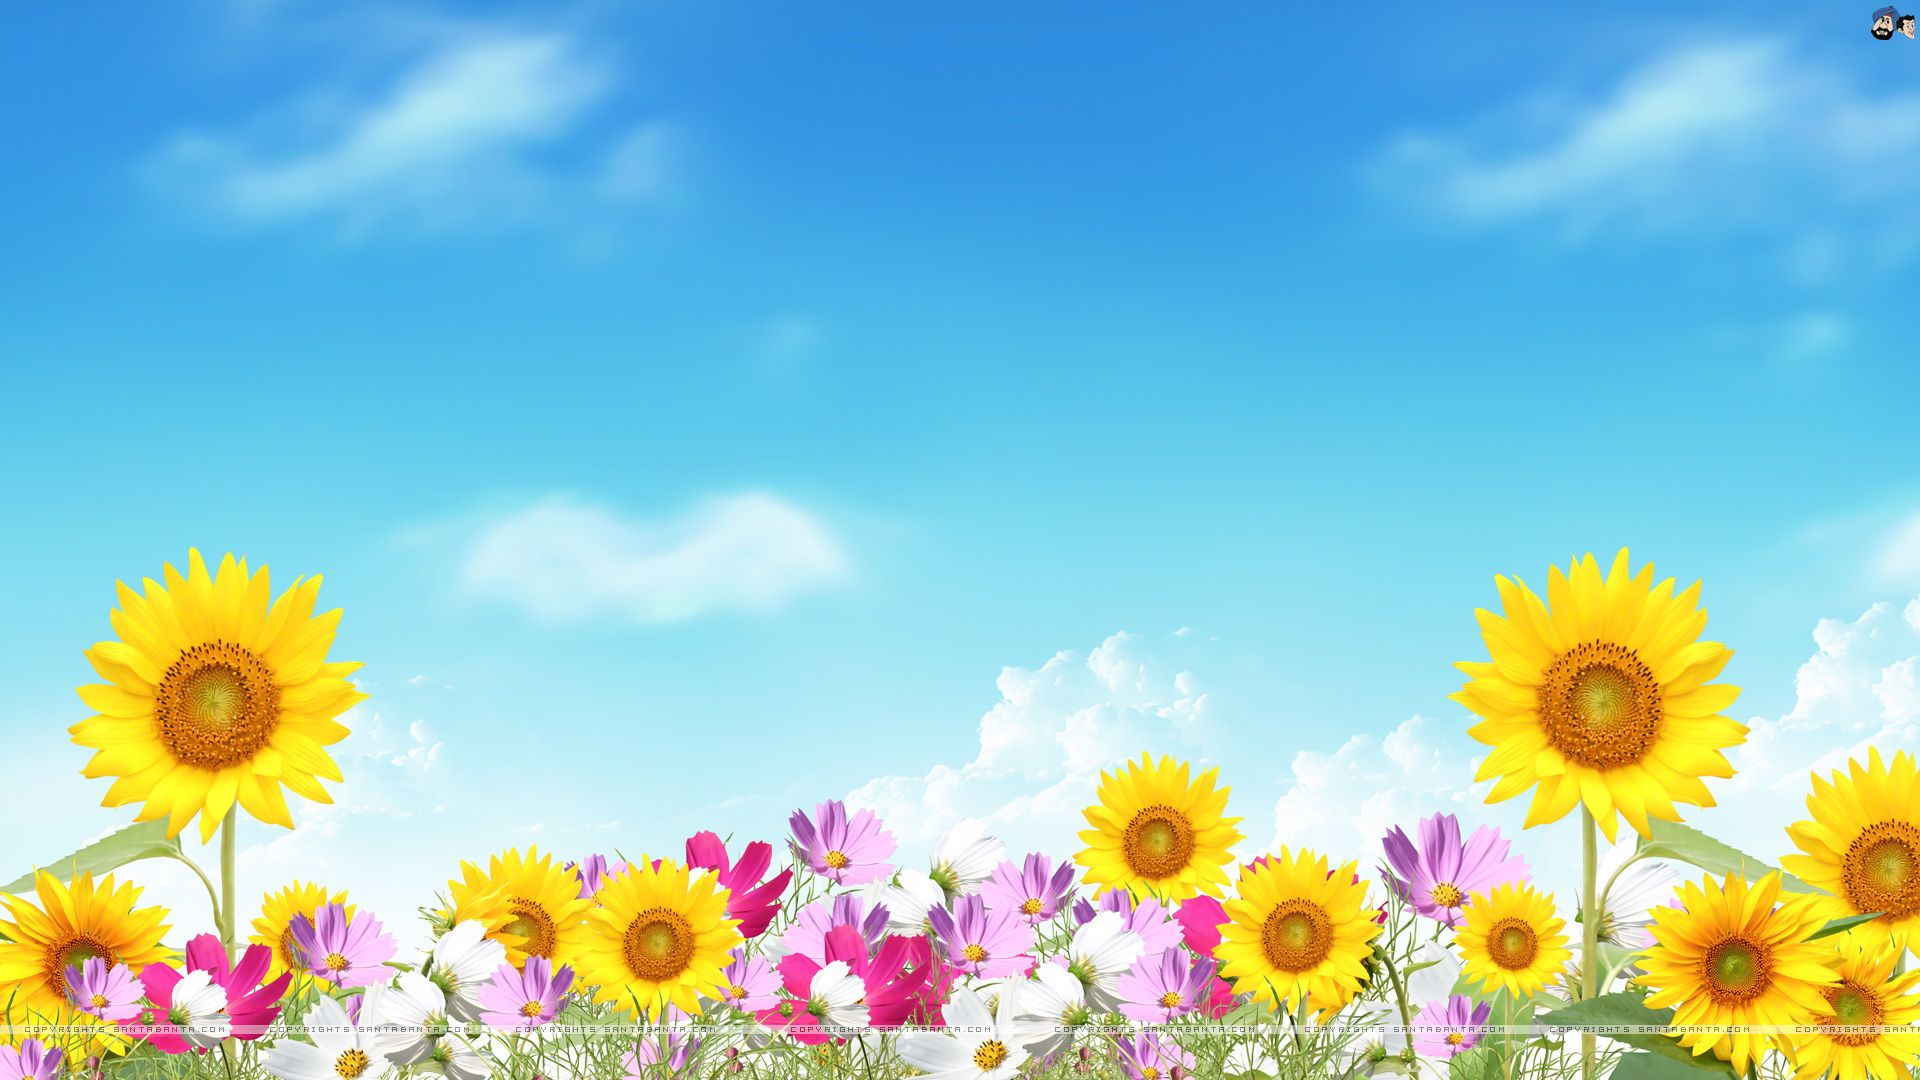 Image For Summer Flowers Puter Background Food Bread In